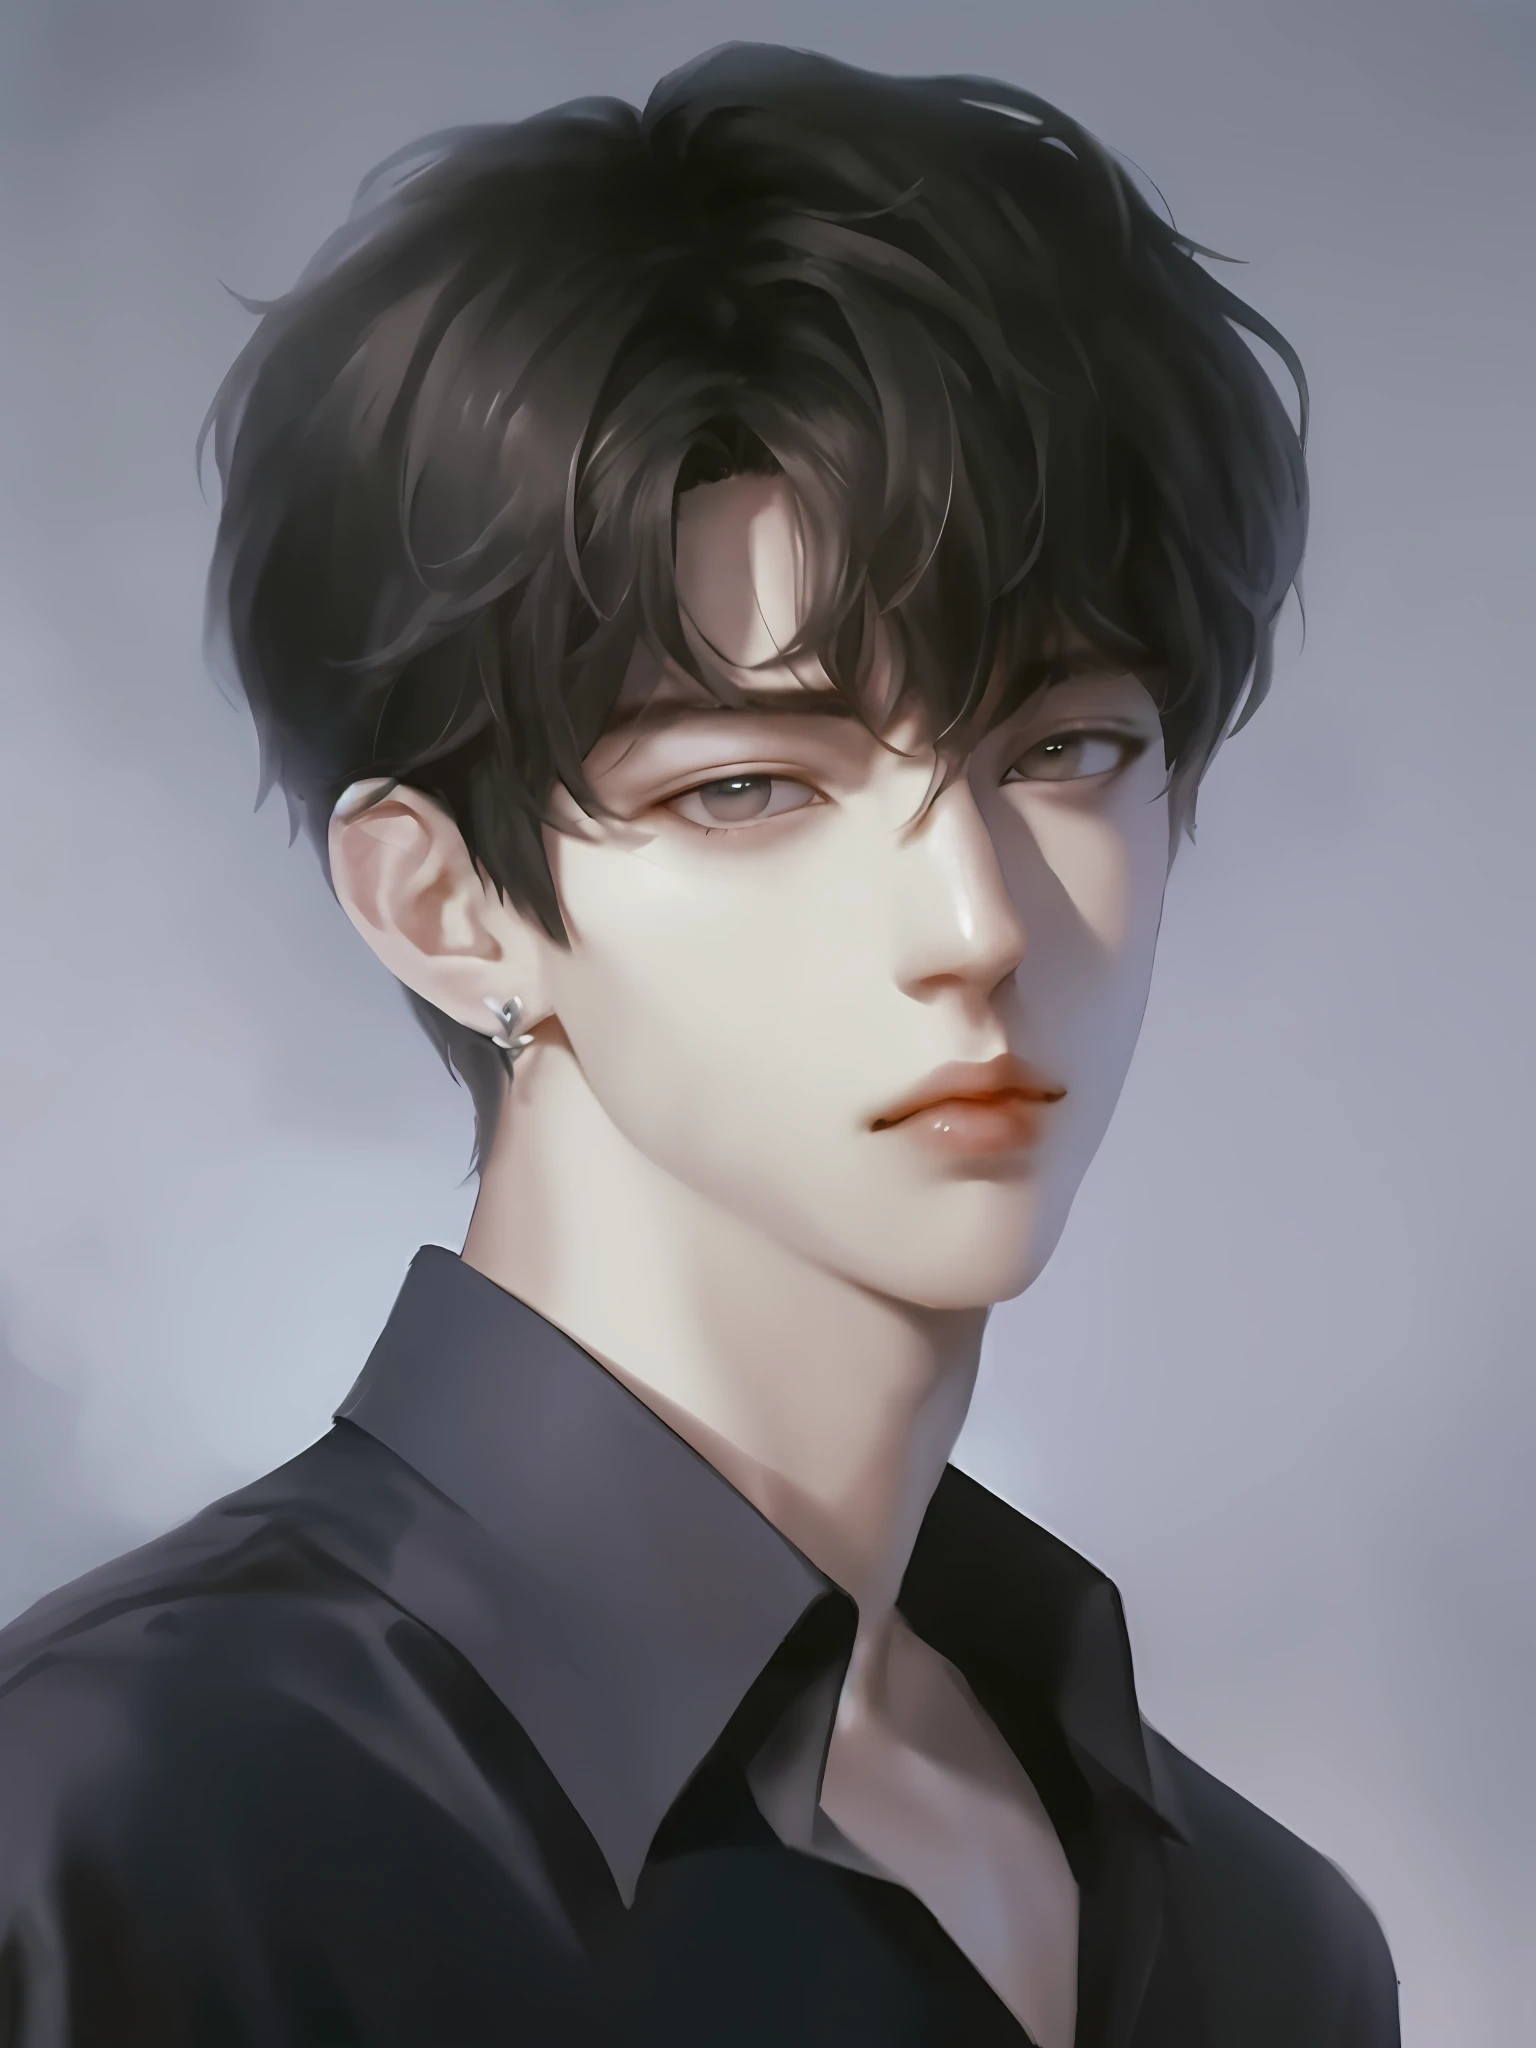 Close-up portrait of a person with platinum hair and white shirt, delicate androgynous prince, Cai Xujun, beautiful androgynous prince, Gwaiz style artwork inspired by Yangjun Chen, porcelain-like skin, Gwise, inspired by Bian Xioming, platinum brand long hair, handsome man in demon slayer art,